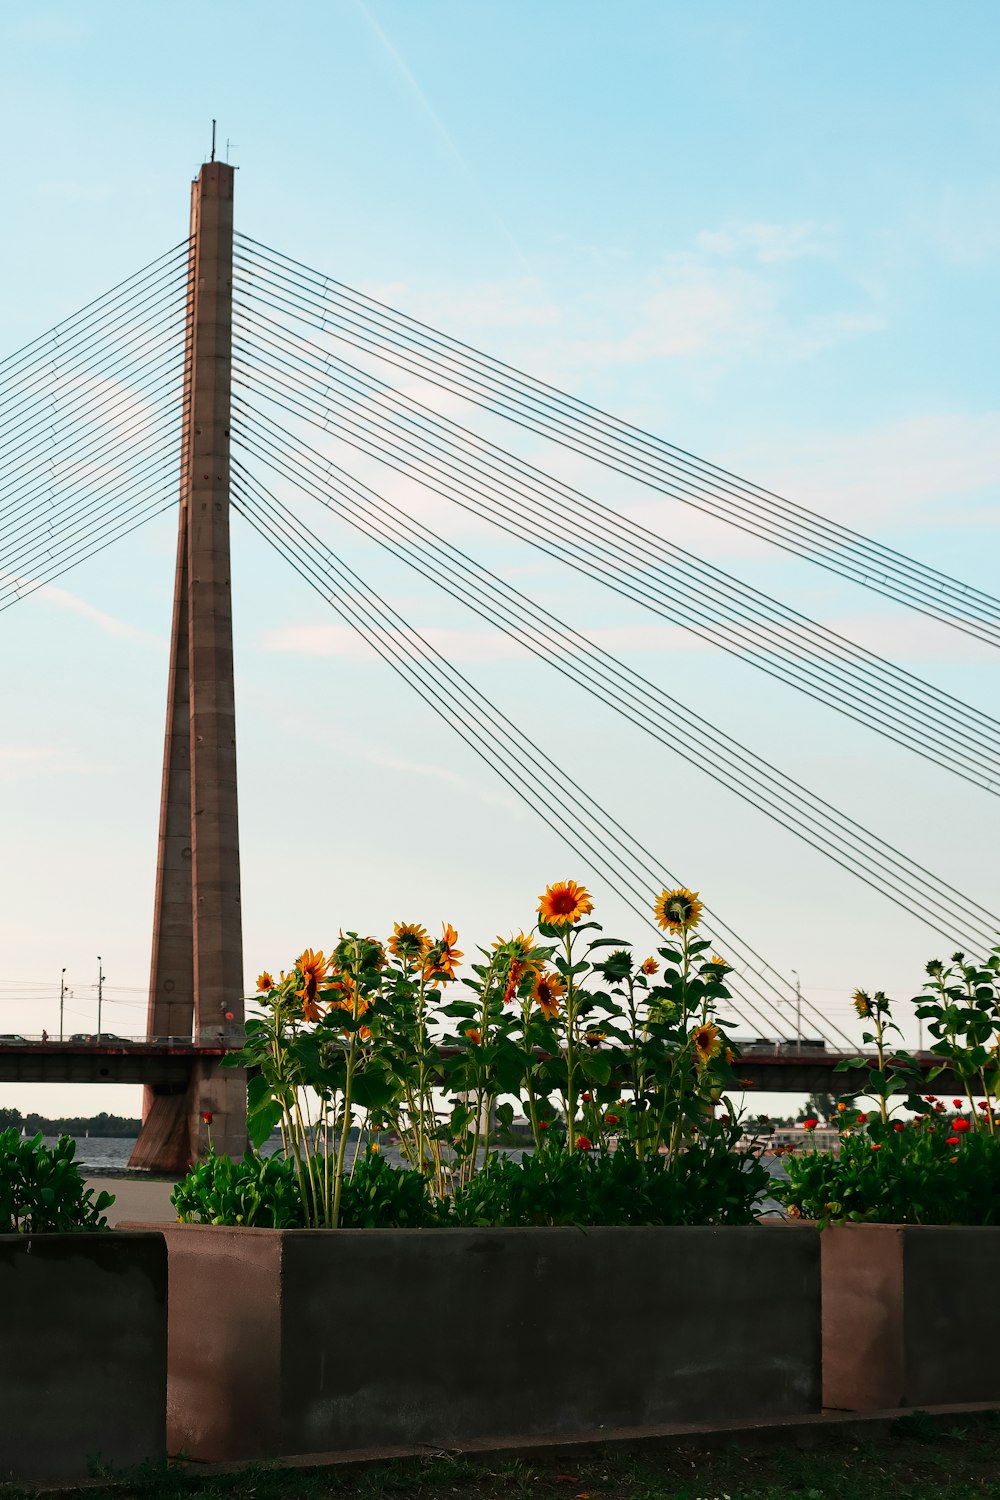 a view of a bridge with a bunch of sunflowers in the foreground